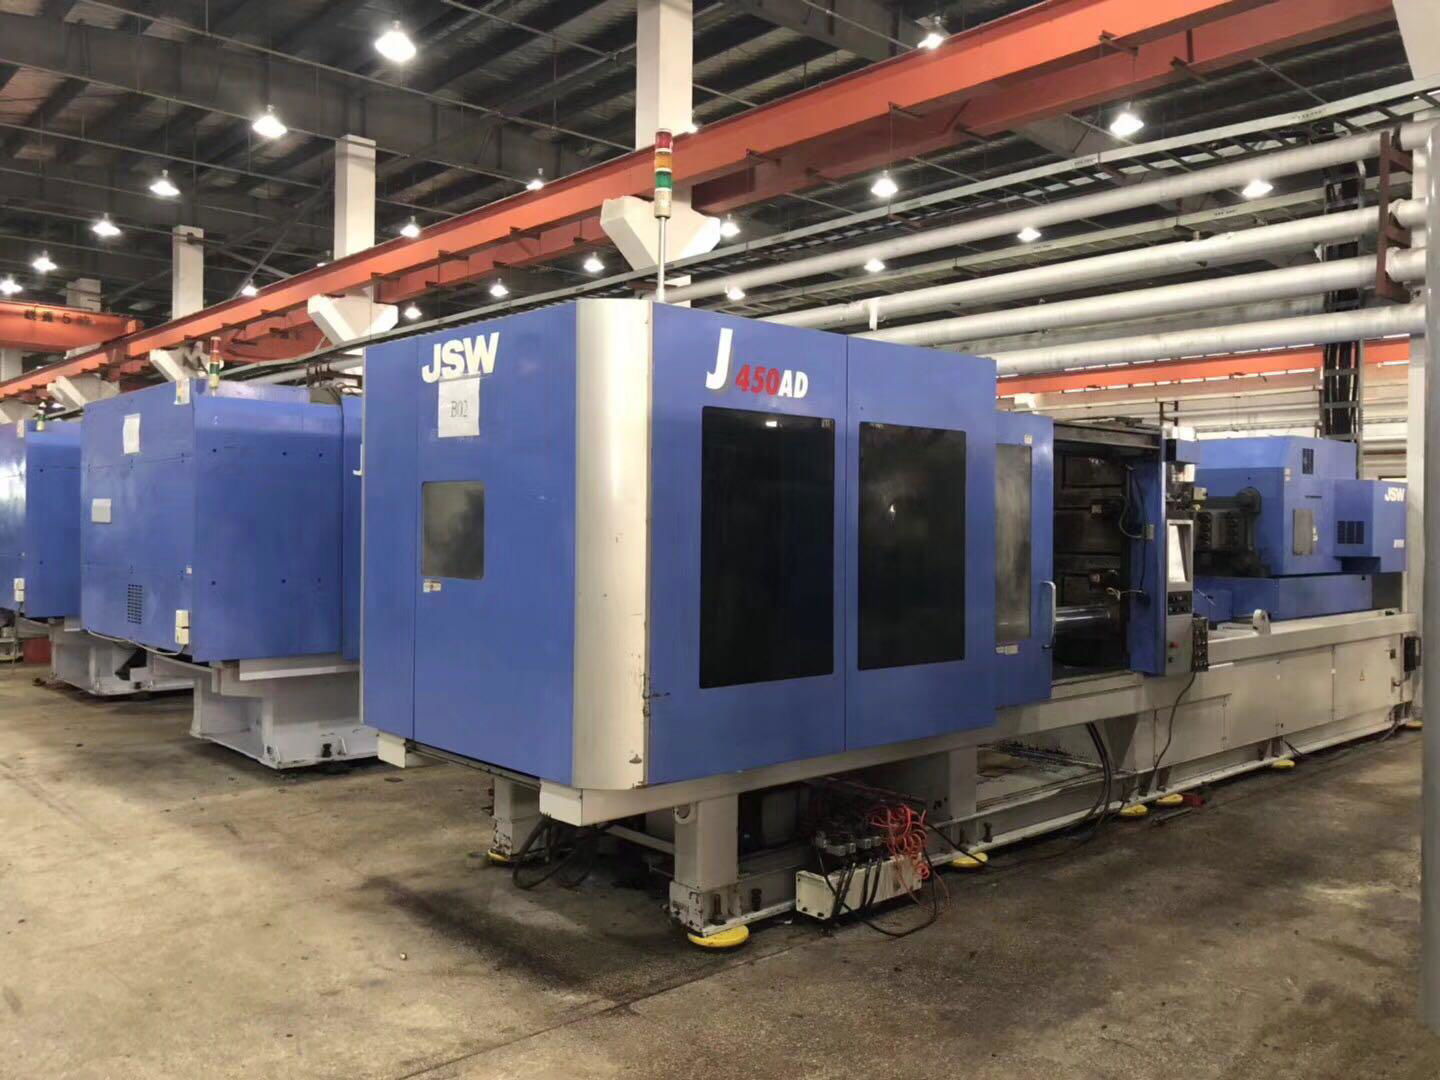 JSWJ450AD All-electric used Injection Molding Machine 5